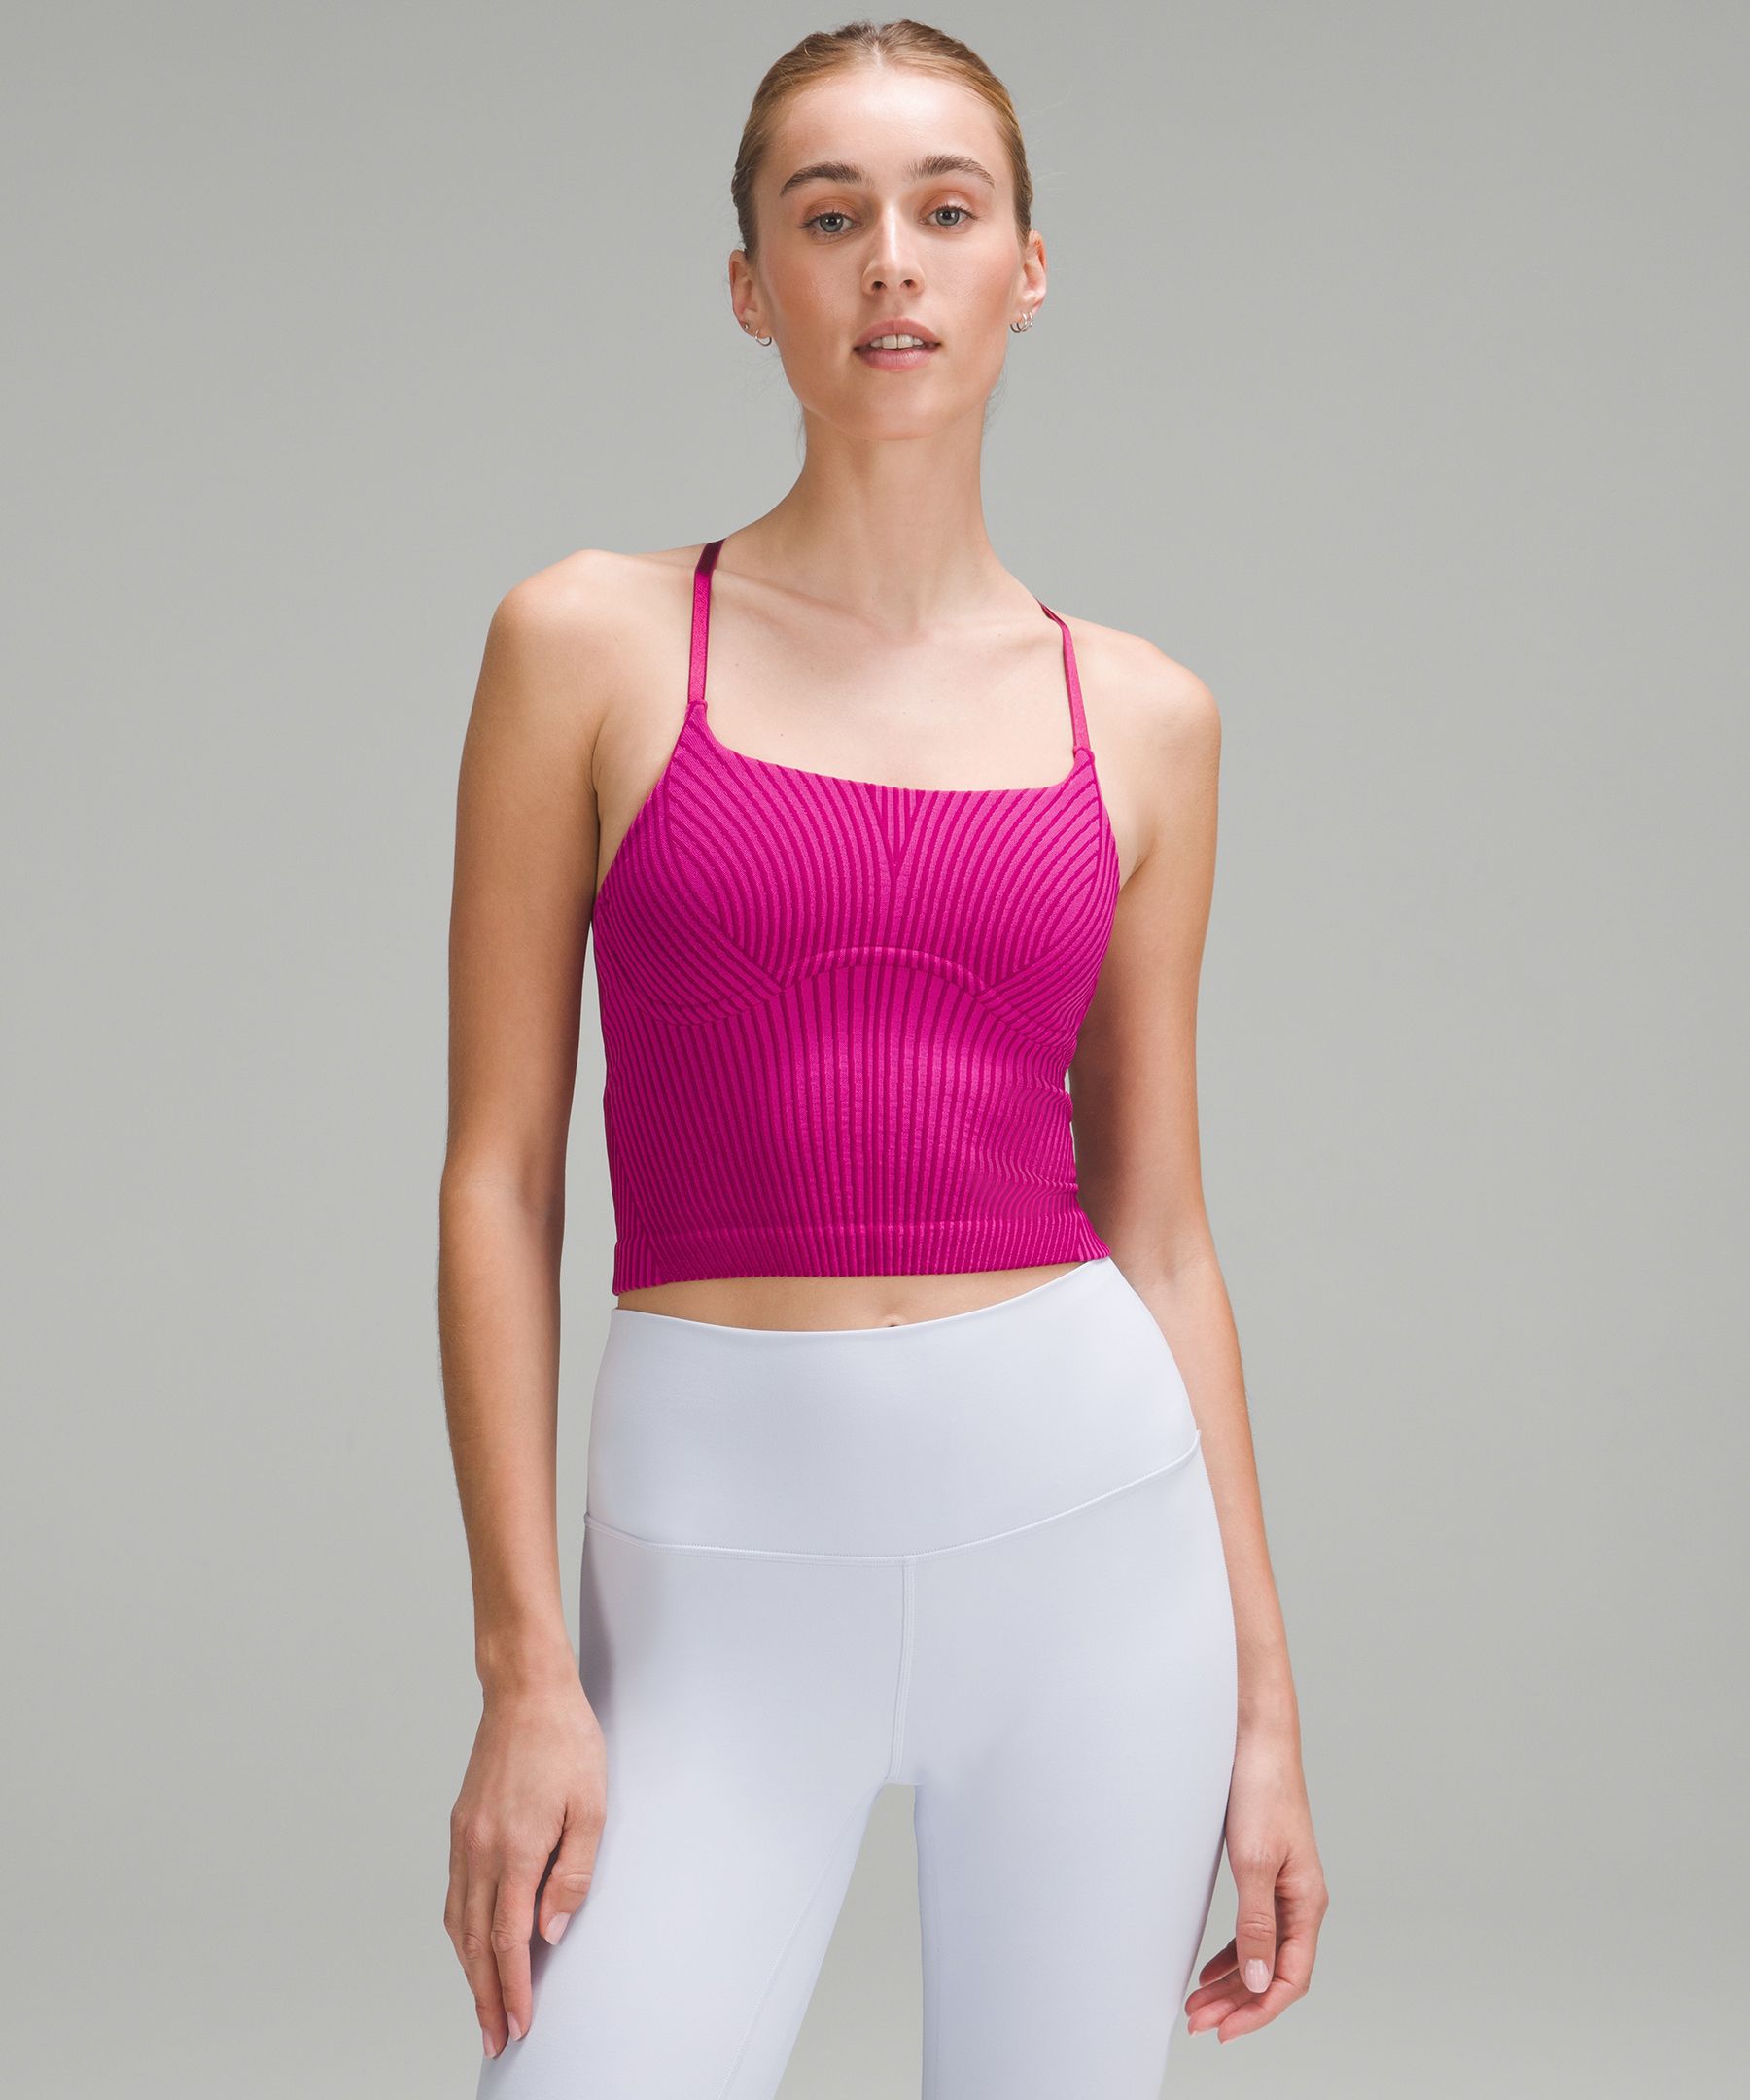 Sy-D999 Softness Stretchy Yoga Padded Workout Tank Top Build in